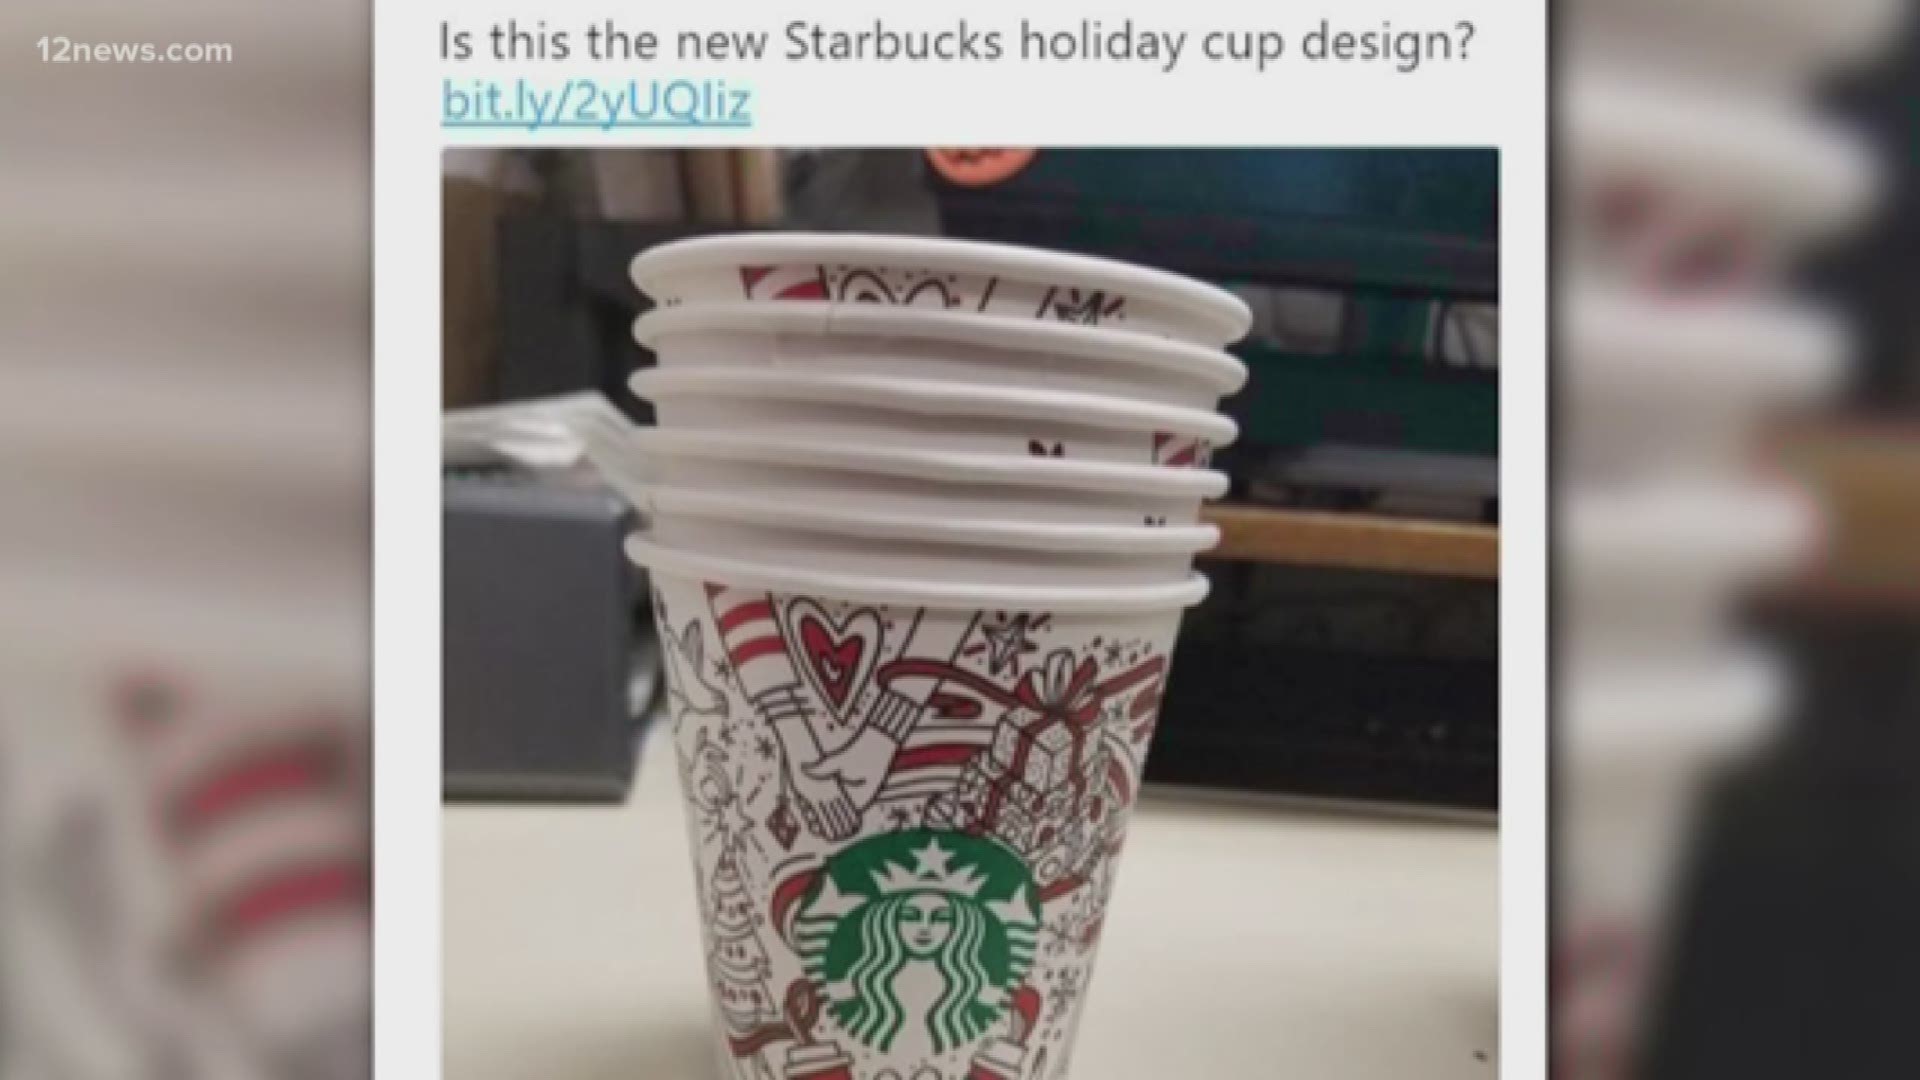 This picture popped up on Reddit showing the supposed 2017 Starbucks holiday cup design.